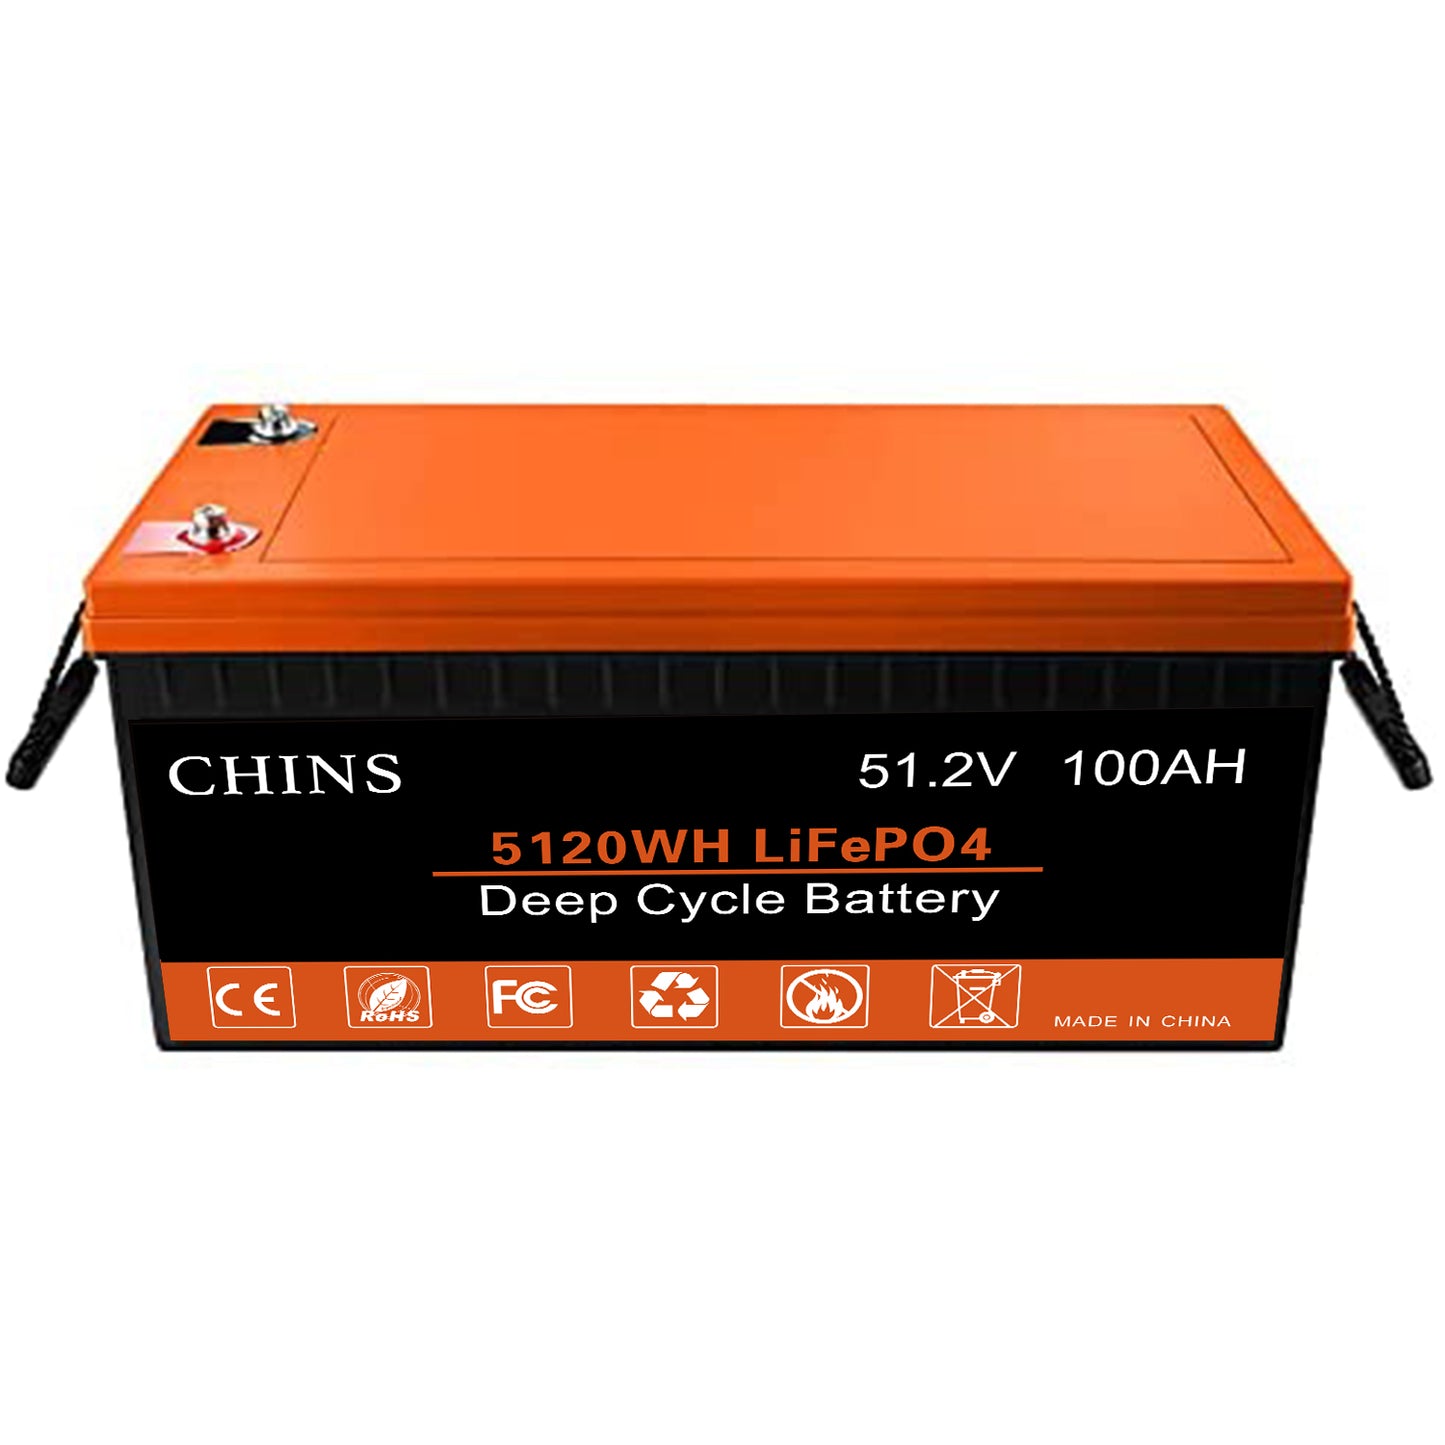 CHINS Bluetooth 48V 100AH LiFePO4 Lithium Battery, Built-in 100A BMS, 2000+ Cycles, Mobile Phone APP Monitors Battery SOC Data